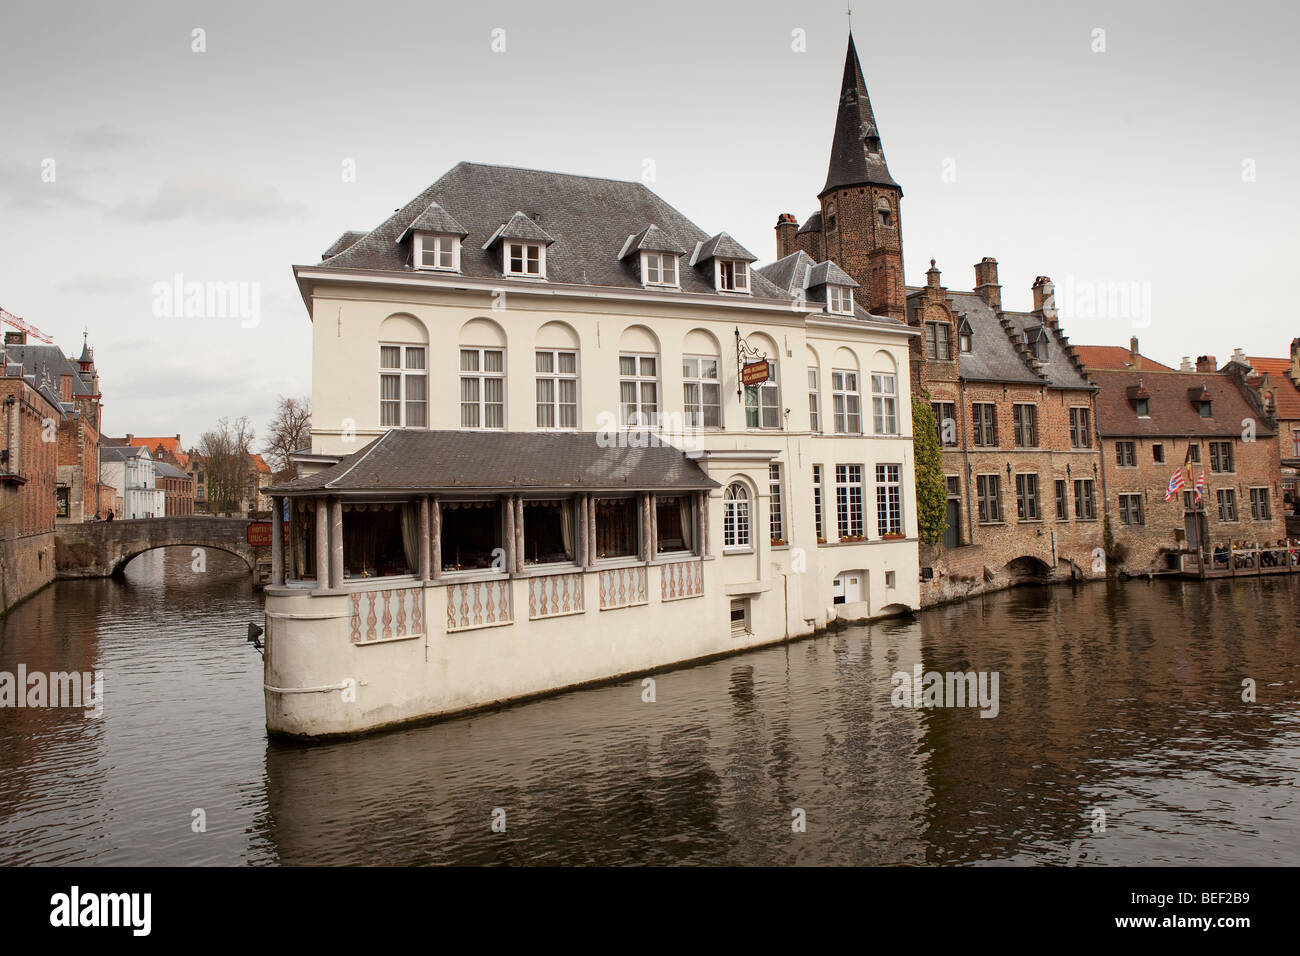 Historical buildings line a canal in Brugge, also known as Bruges, Belgium. Stock Photo